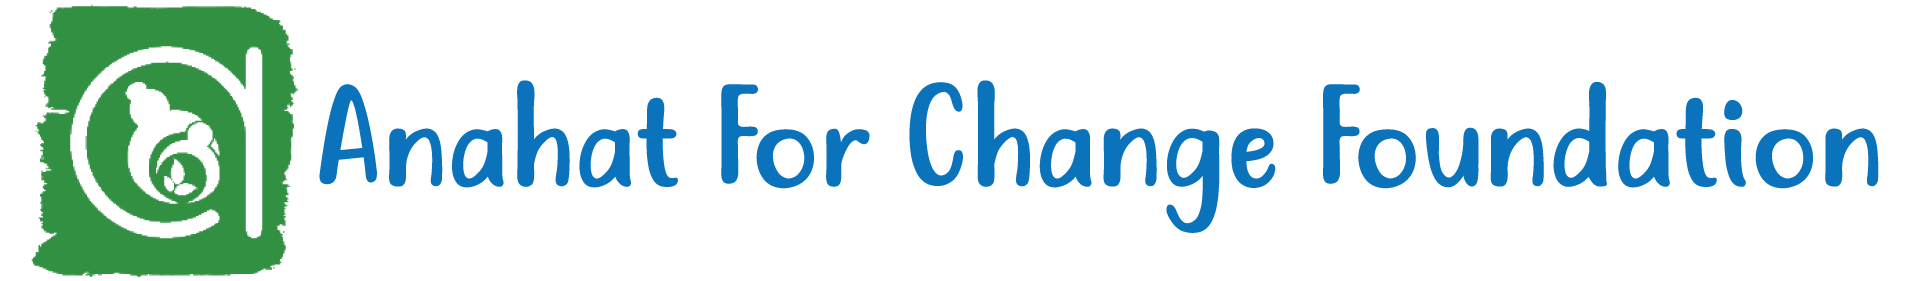 Anahat for Change Foundation logo